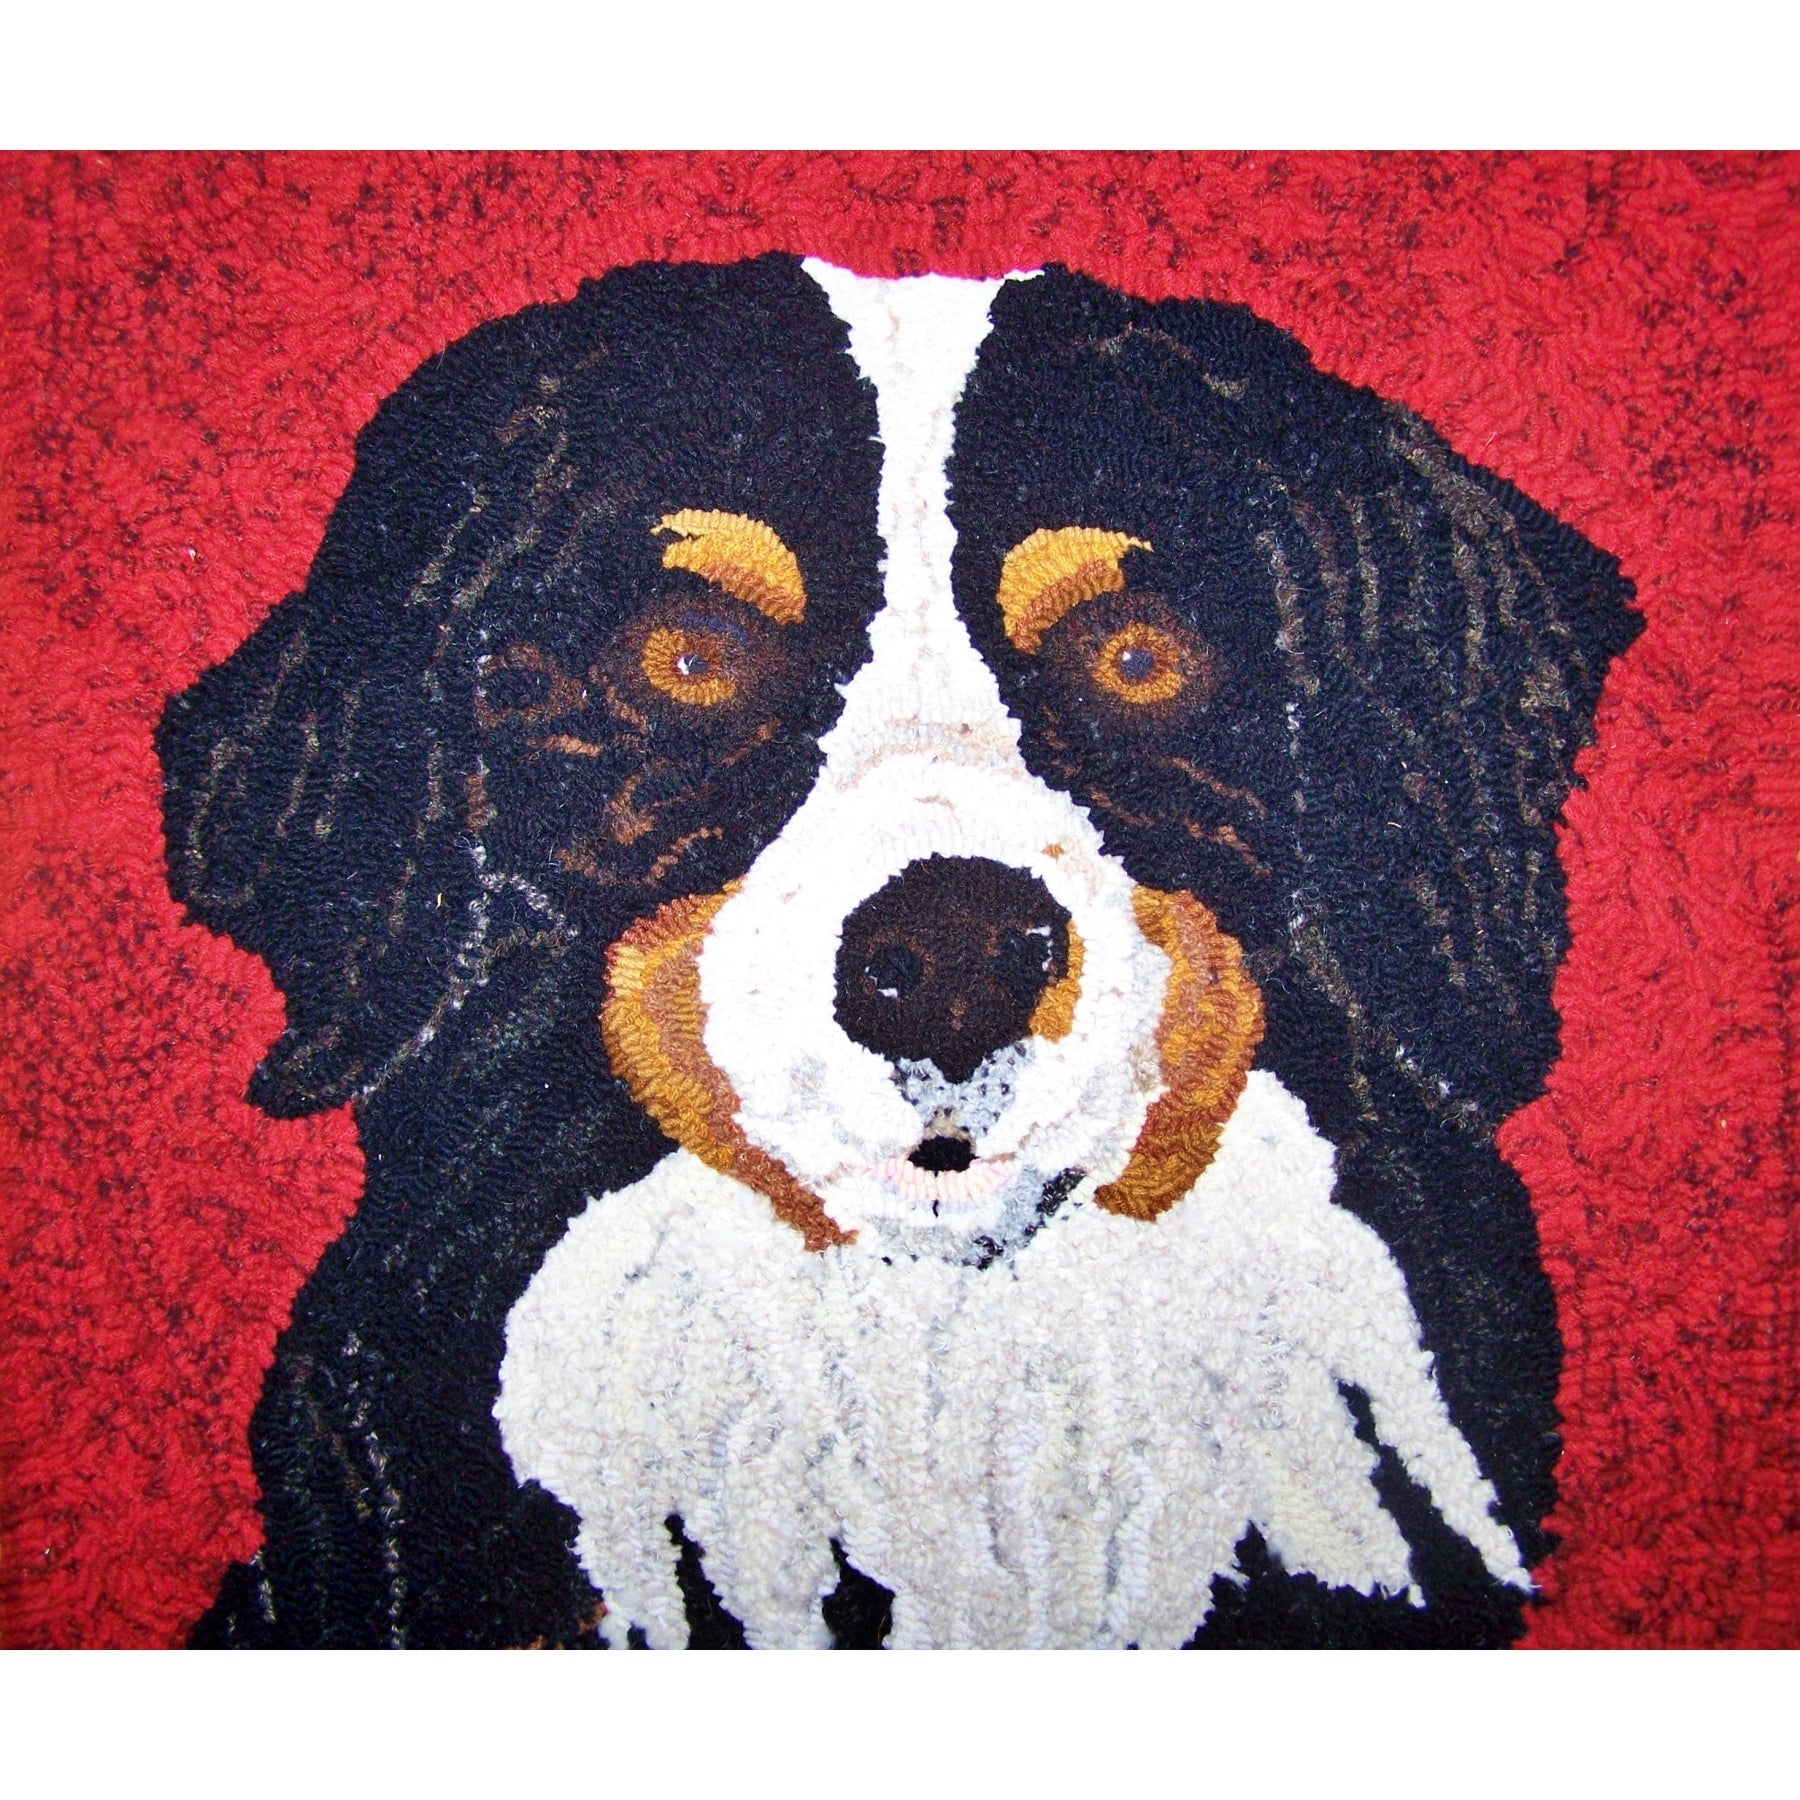 Bernese Mountain Dog, rug hooked by Laura Fitch